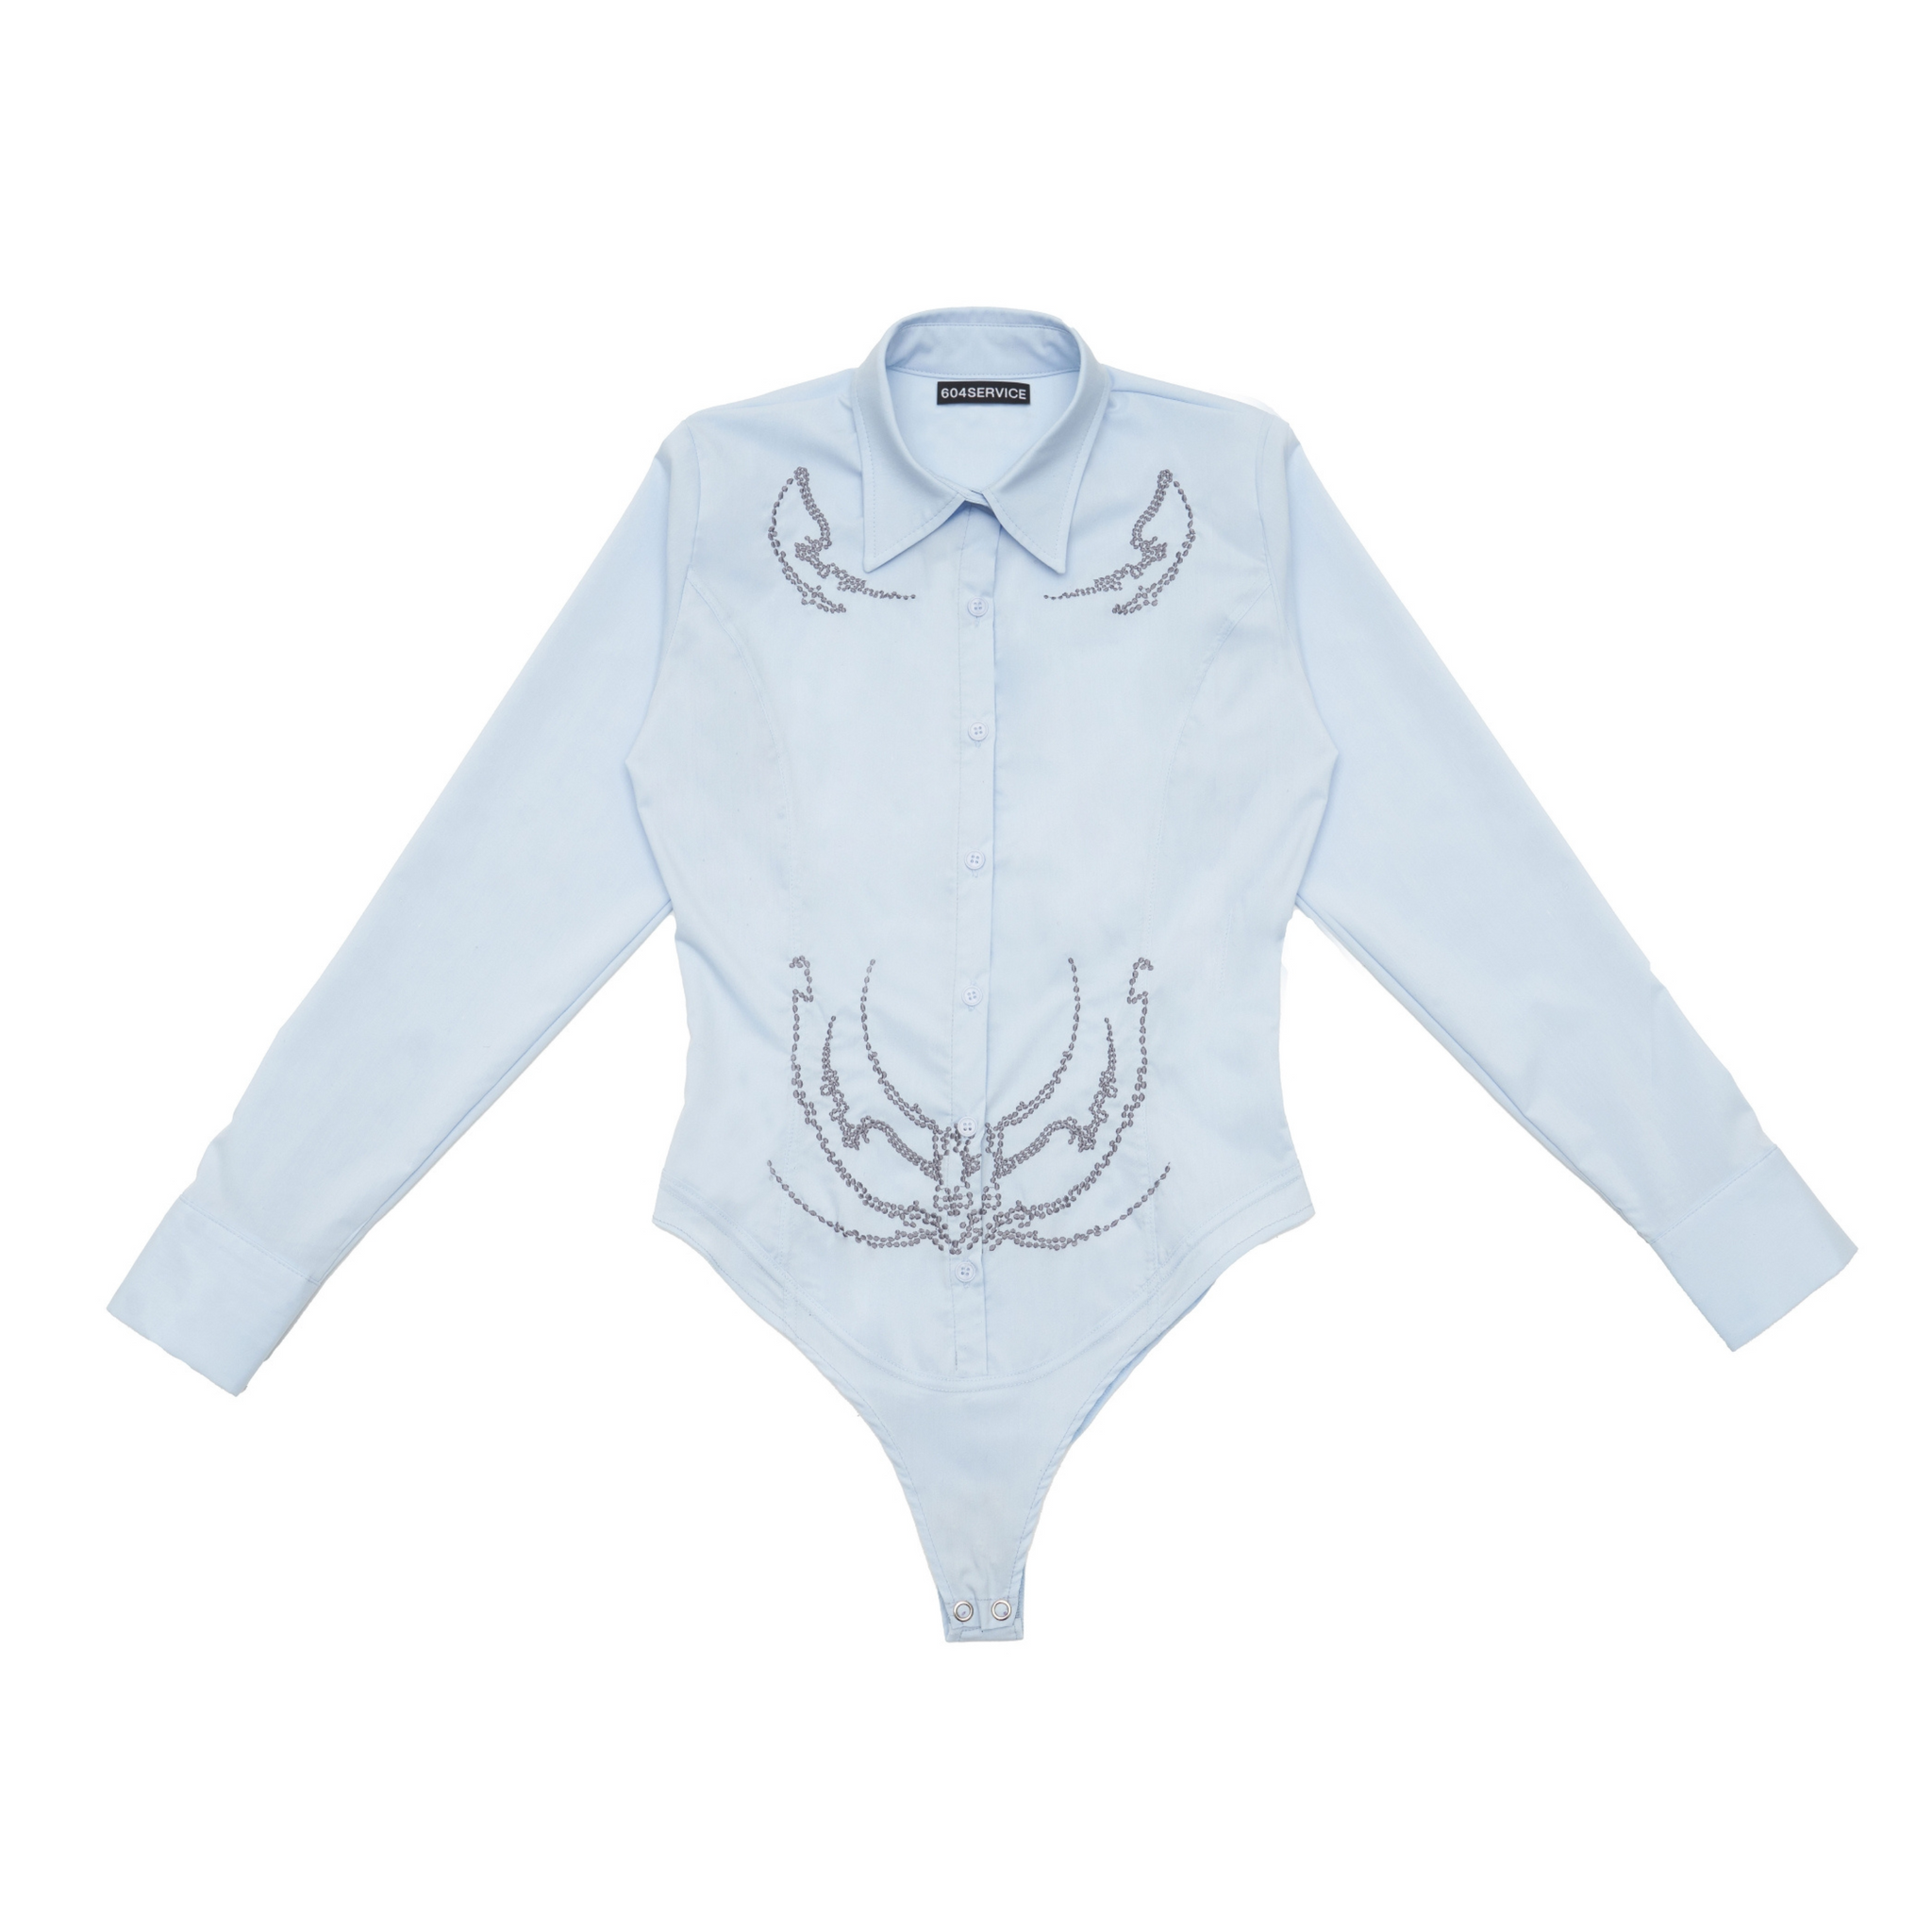 Embroidered Office Bodysuit